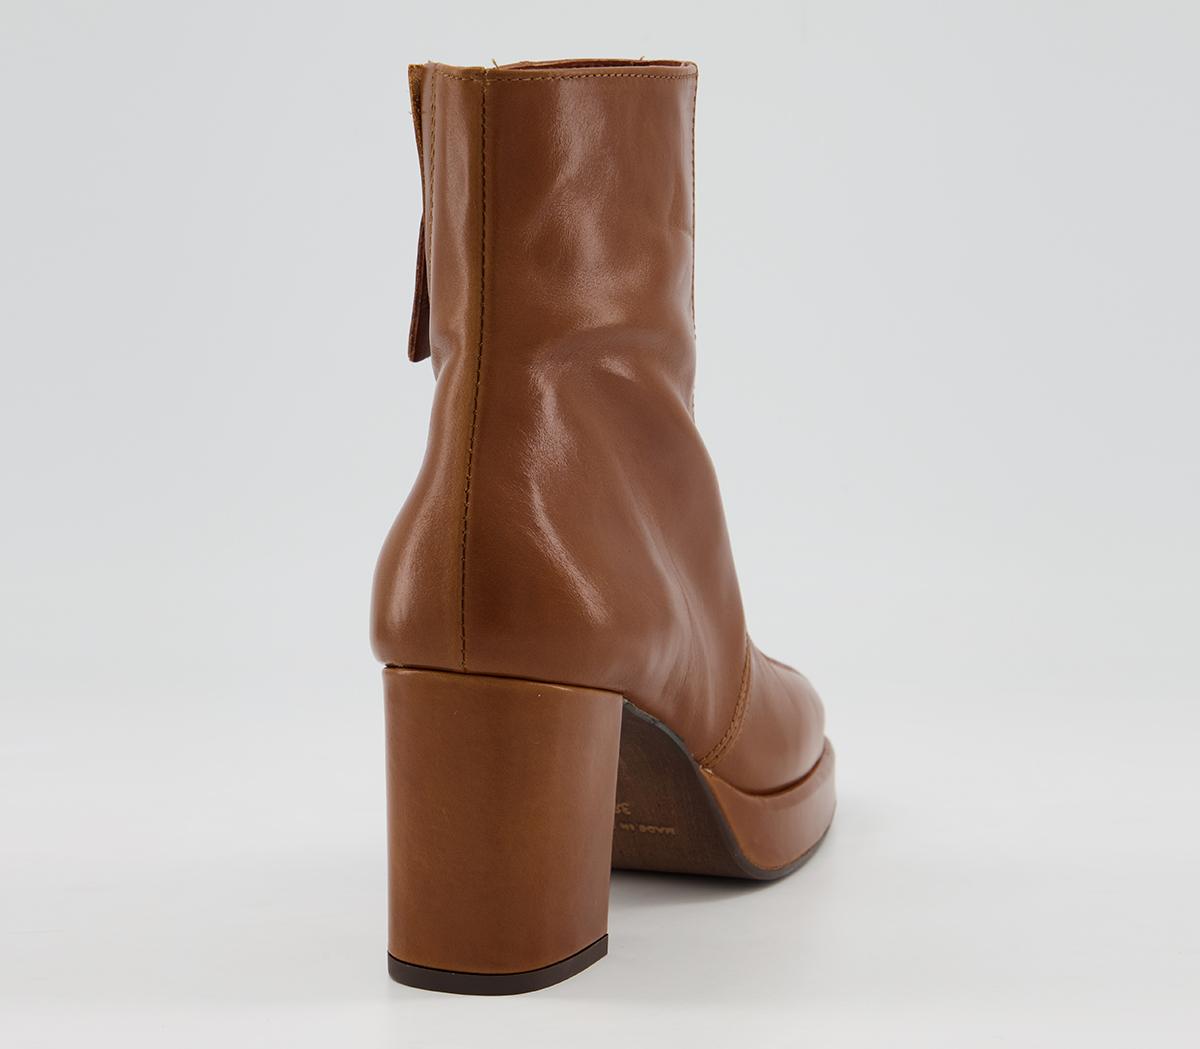 OFFICE Adele Platform Ankle Boots Tan Leather - Women's Ankle Boots